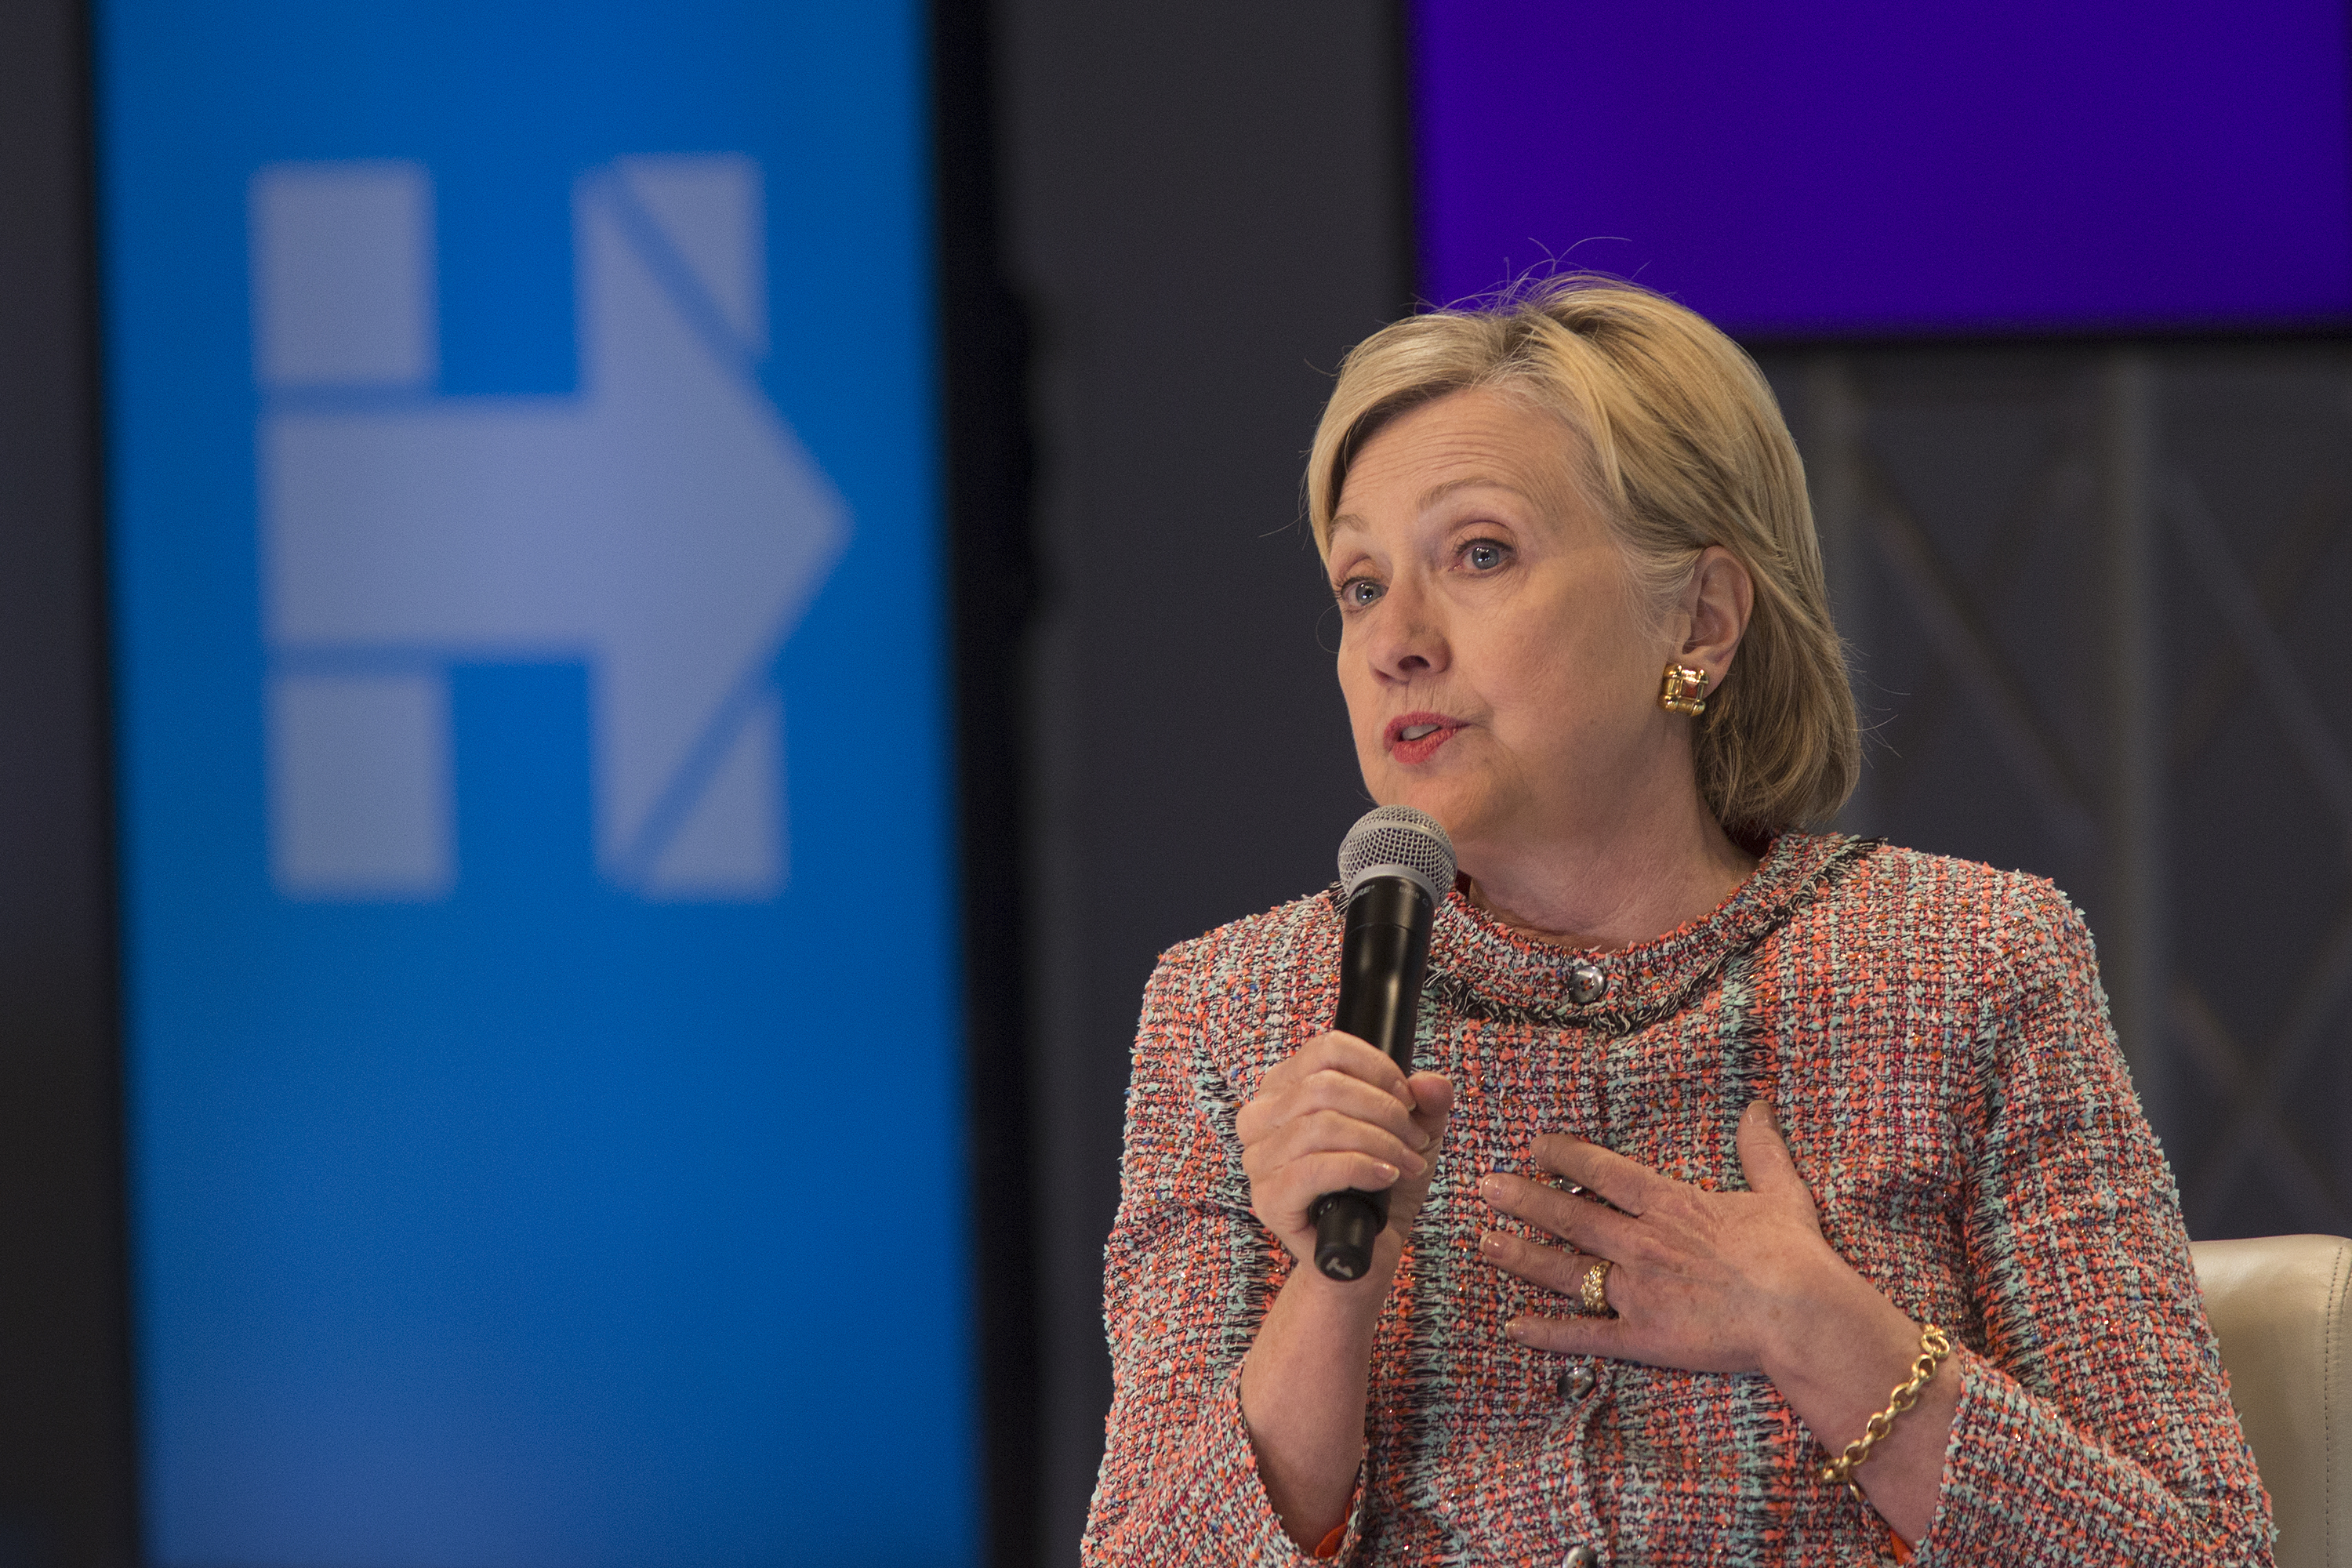 Democratic presidential candidate Hillary Clinton answers a question from an audience member at a town hall discussion with digital content creators at Neuehouse Hollywood on June 28, 2016 in Los Angeles, California. (David McNew&mdash;Getty Images)